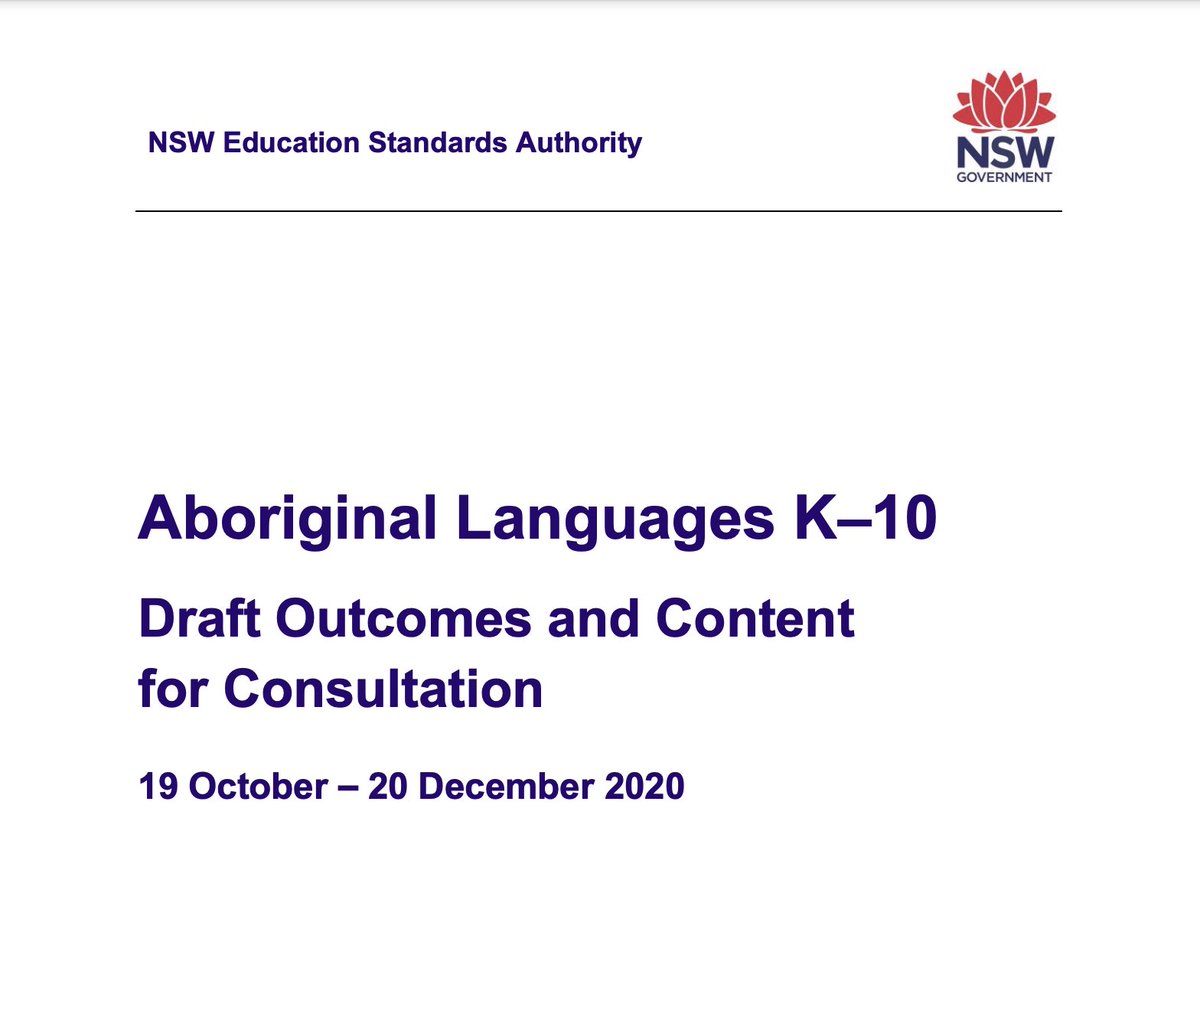 Congratulations to the authors and advocates behind this draft #aboriginallanguages K-10. Was so insightful listening to all at last night’s @NewsAtNESA consultation. Great momentum around teaching/learning indigenous languages. Ought to be the norm! @bigibila 👏